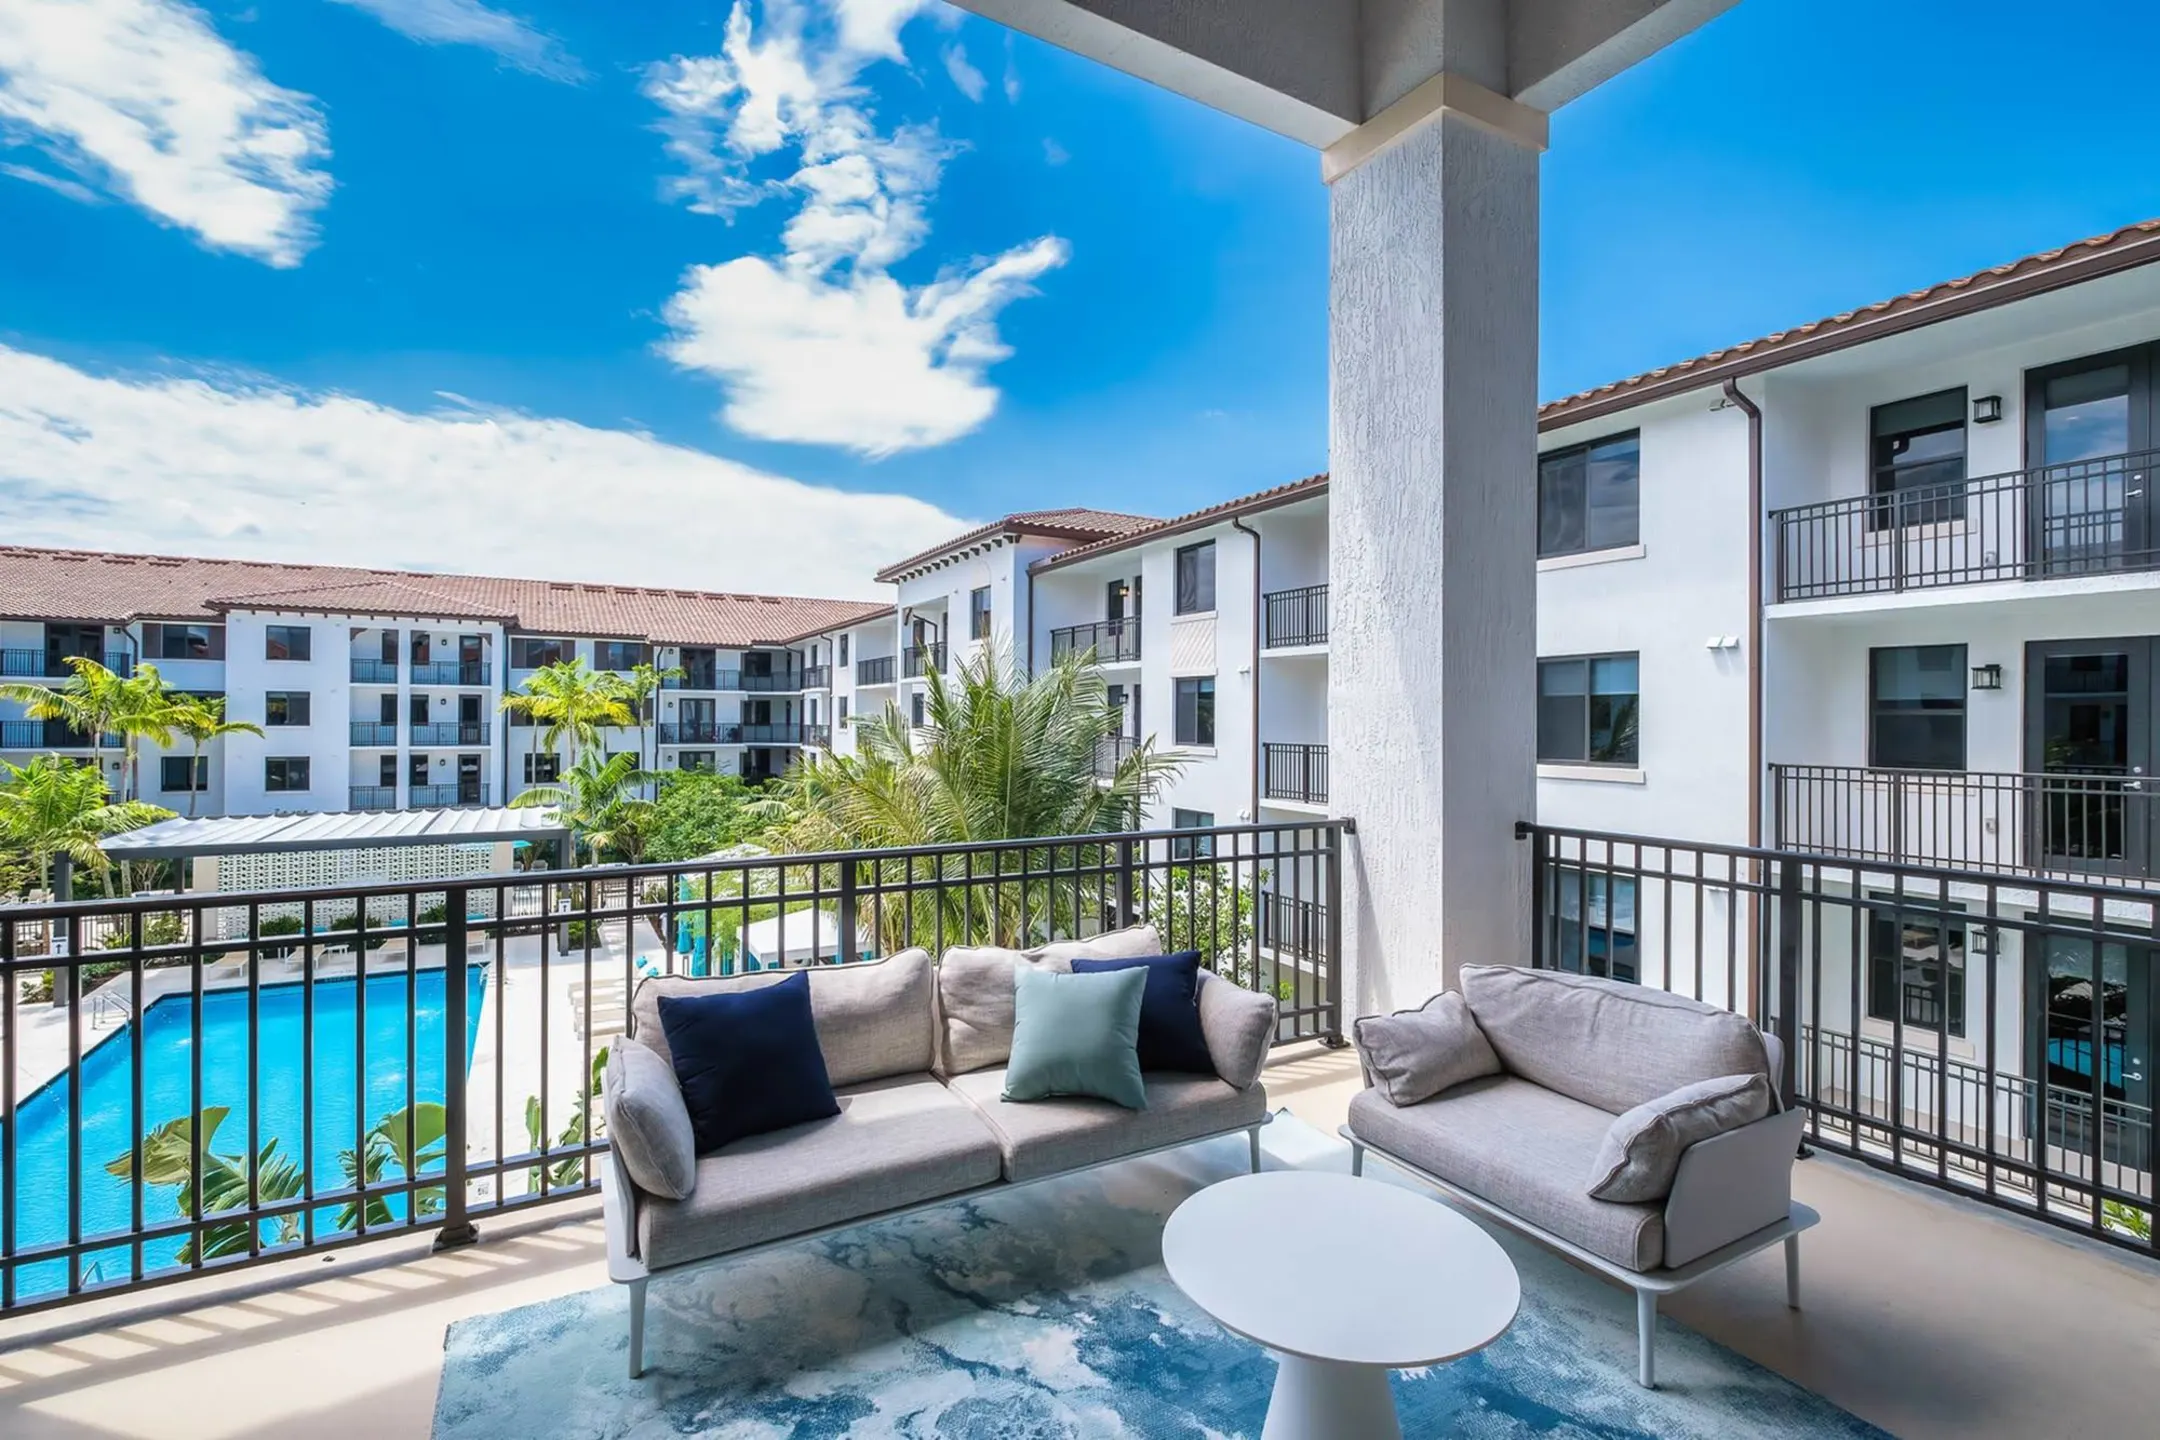 Pool - The Residences at Monterra Commons - 55+ Active Adult Community - Pembroke Pines, FL